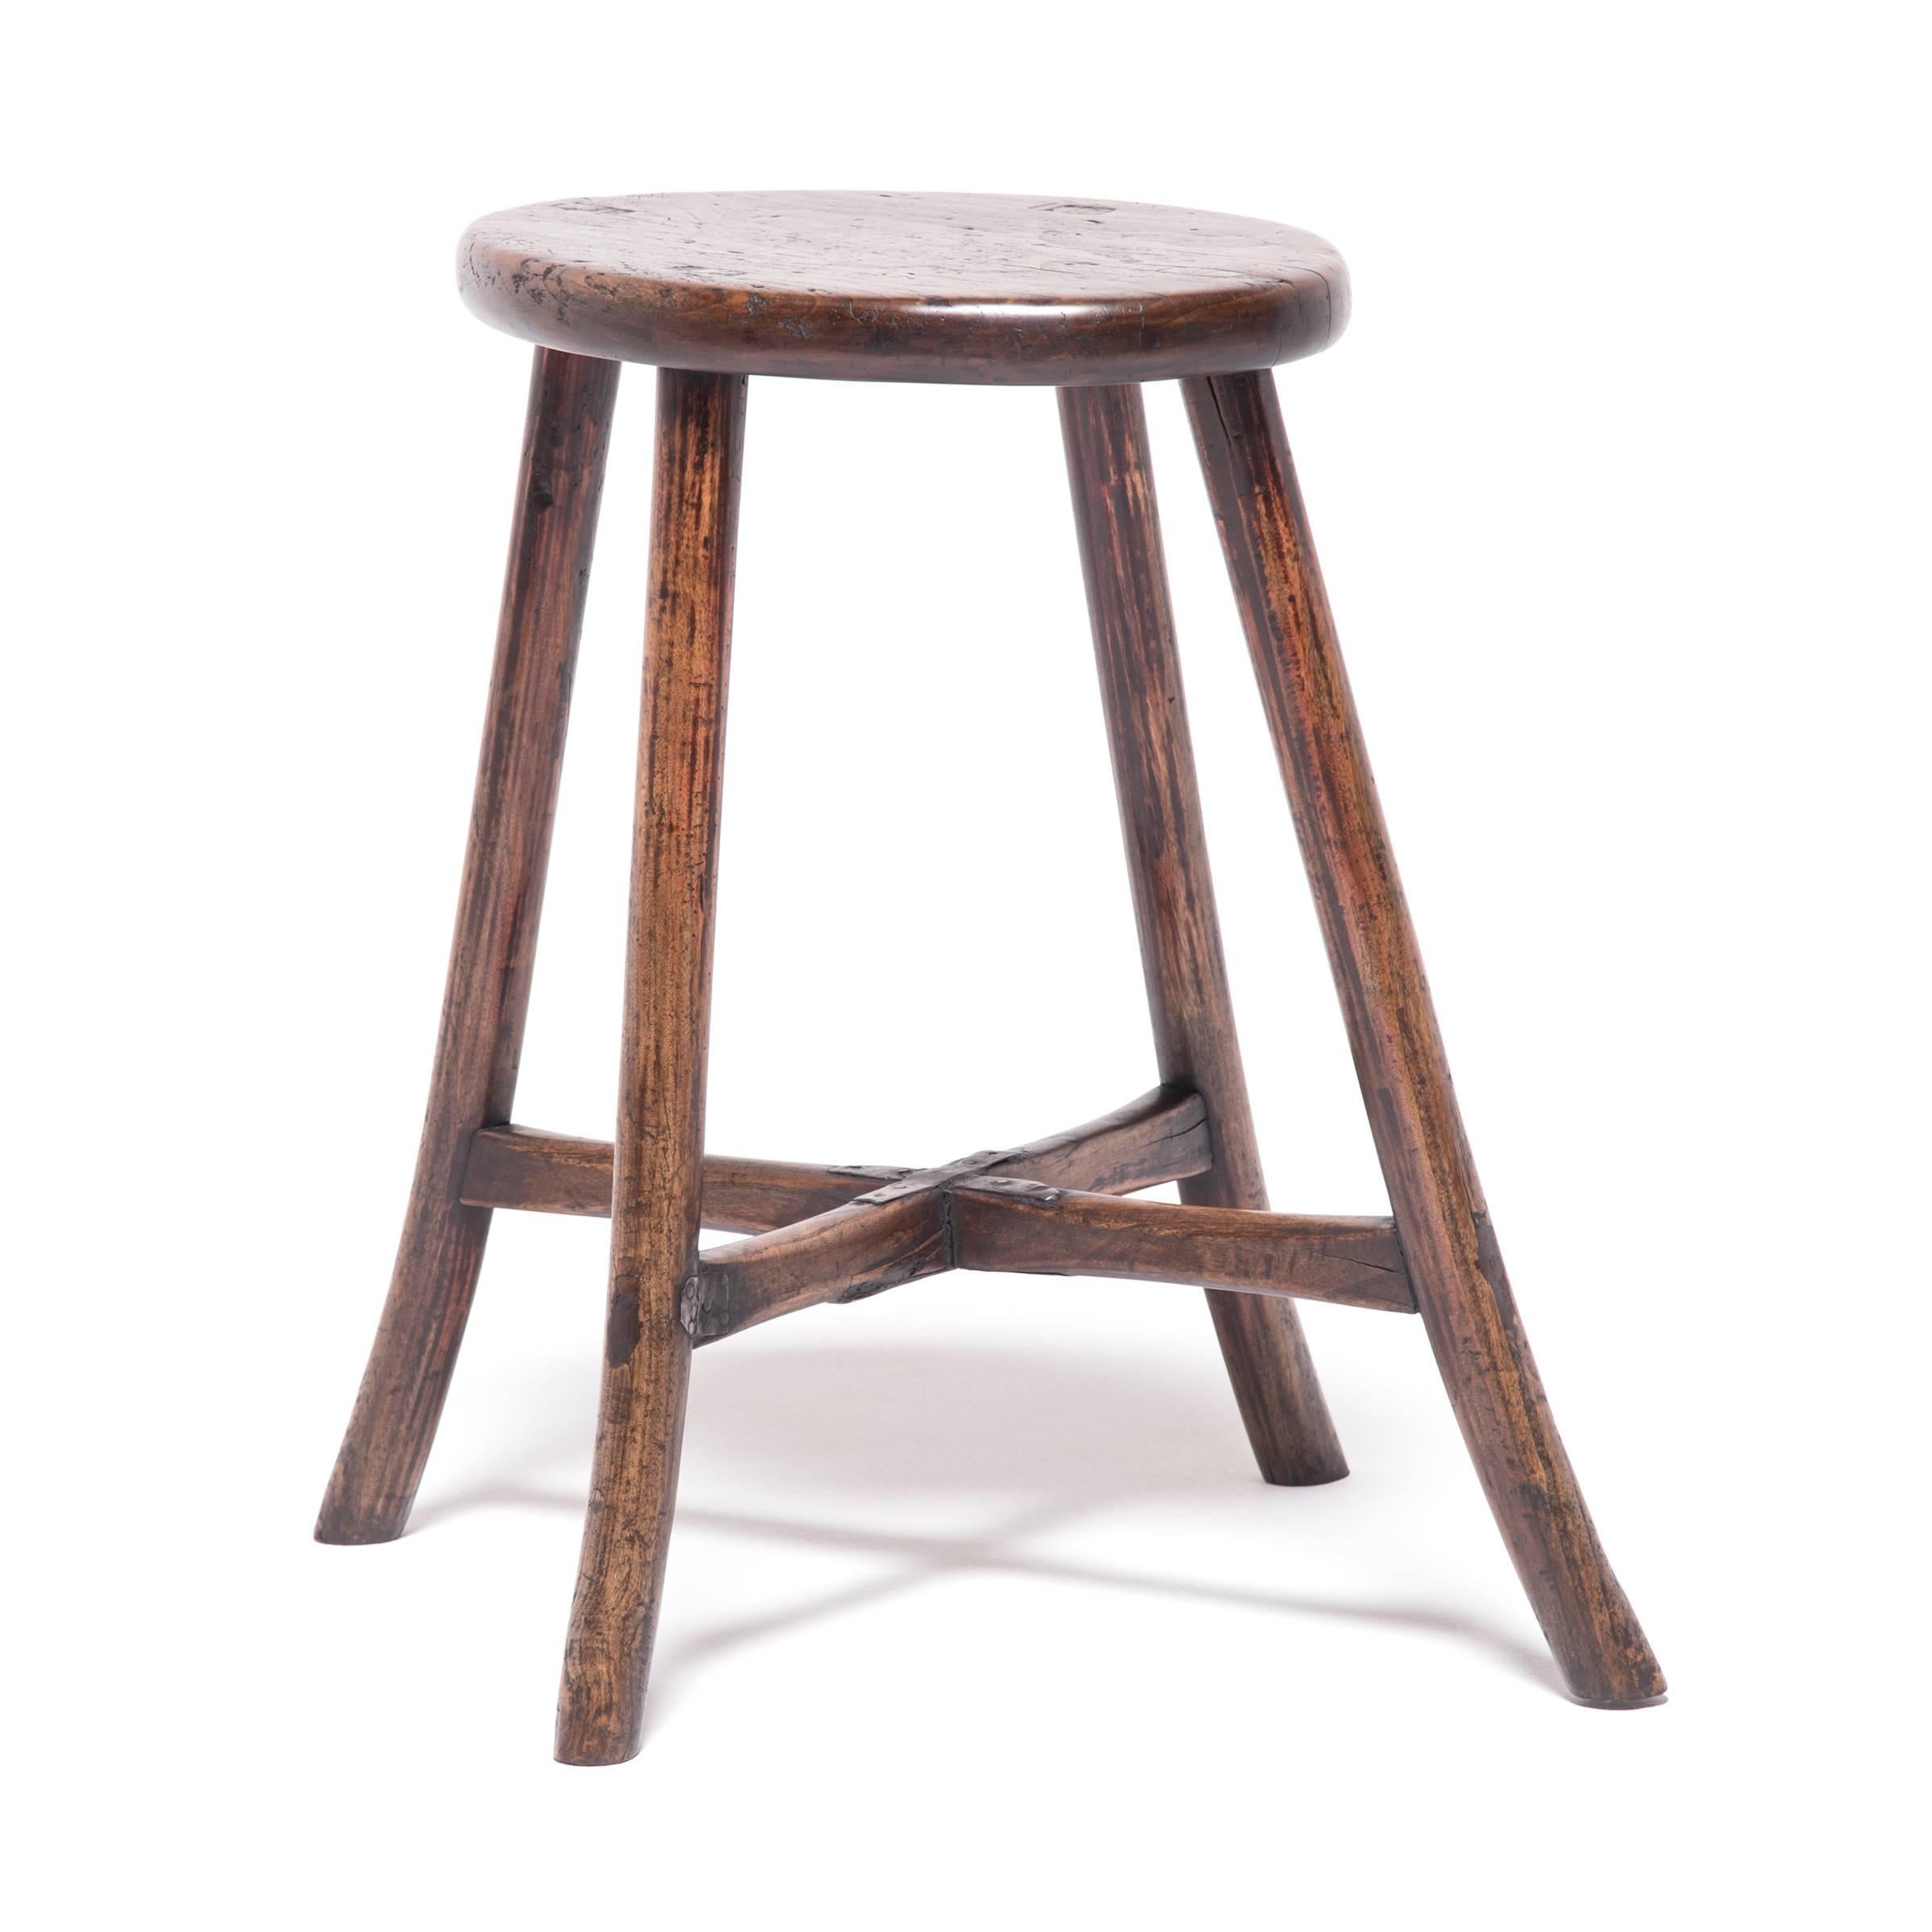 19th Century Chinese Provincial Oval Stool with Flared Legs